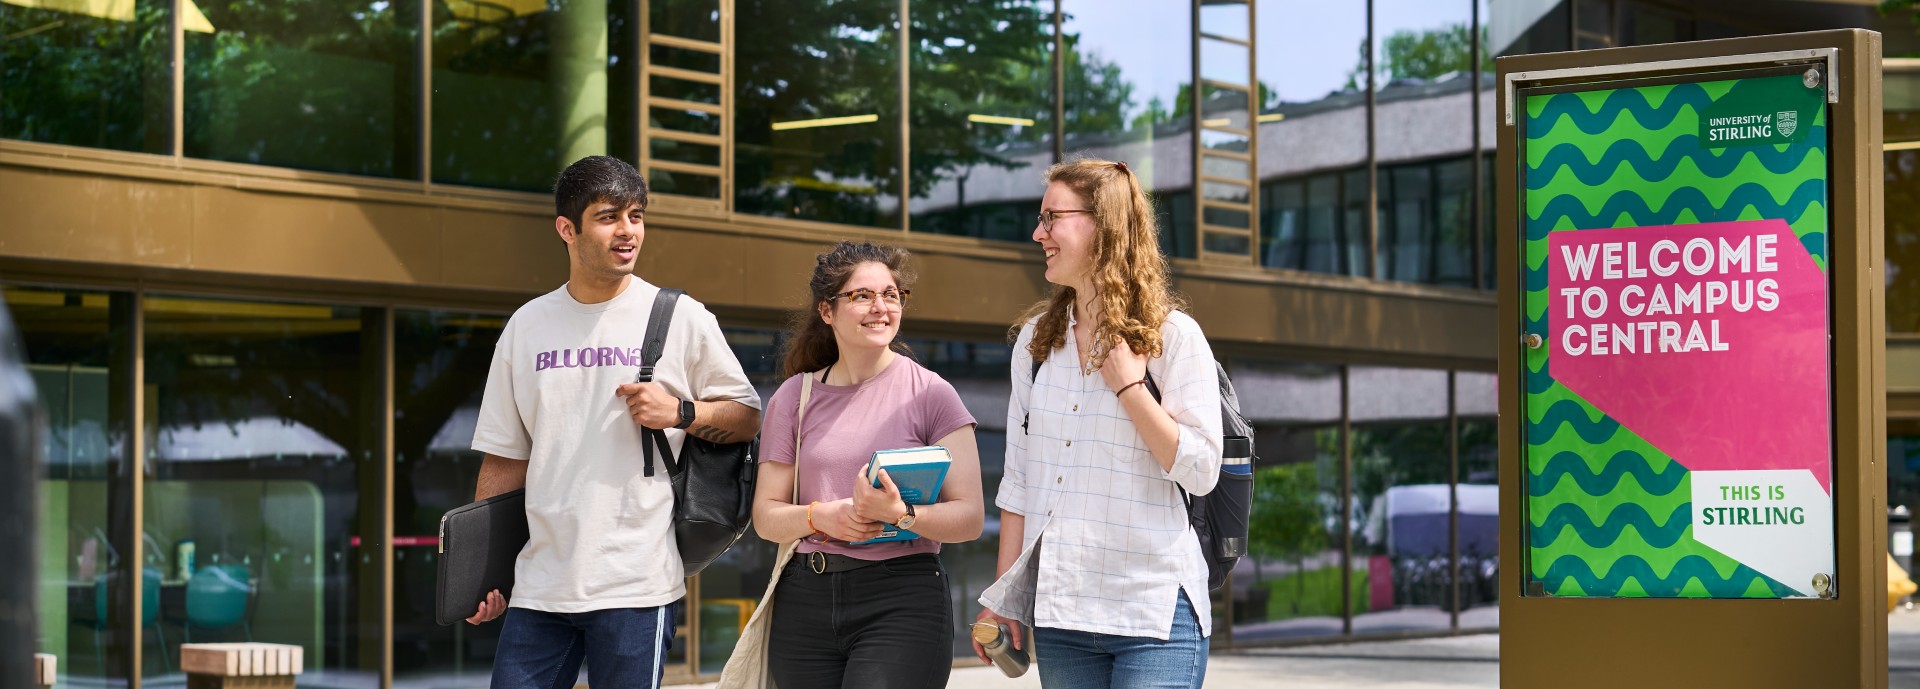 Students outside Campus Central